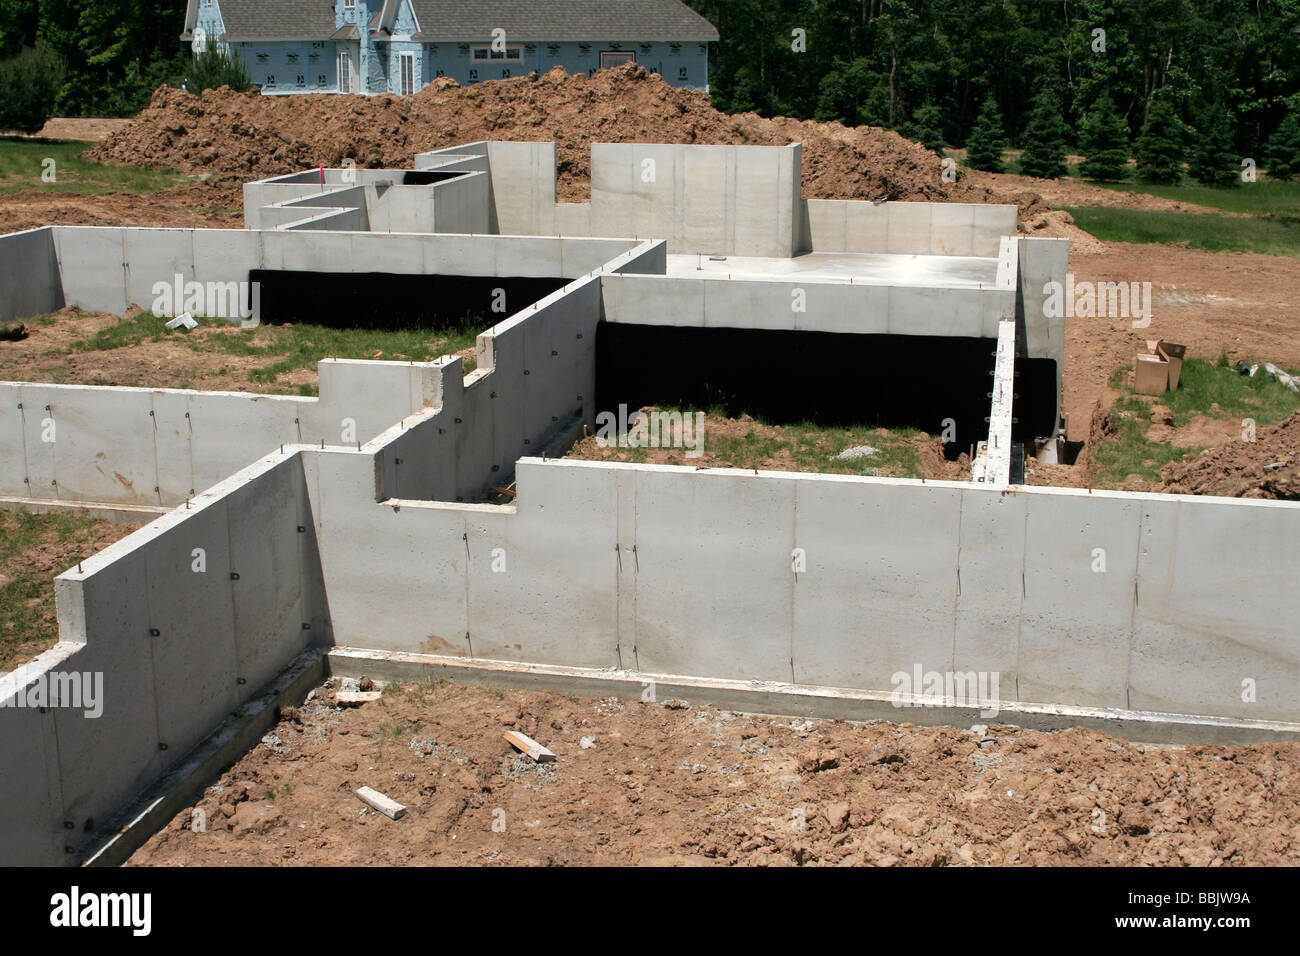 Labyrinth Of Poured Concrete Basement Walls In New Home